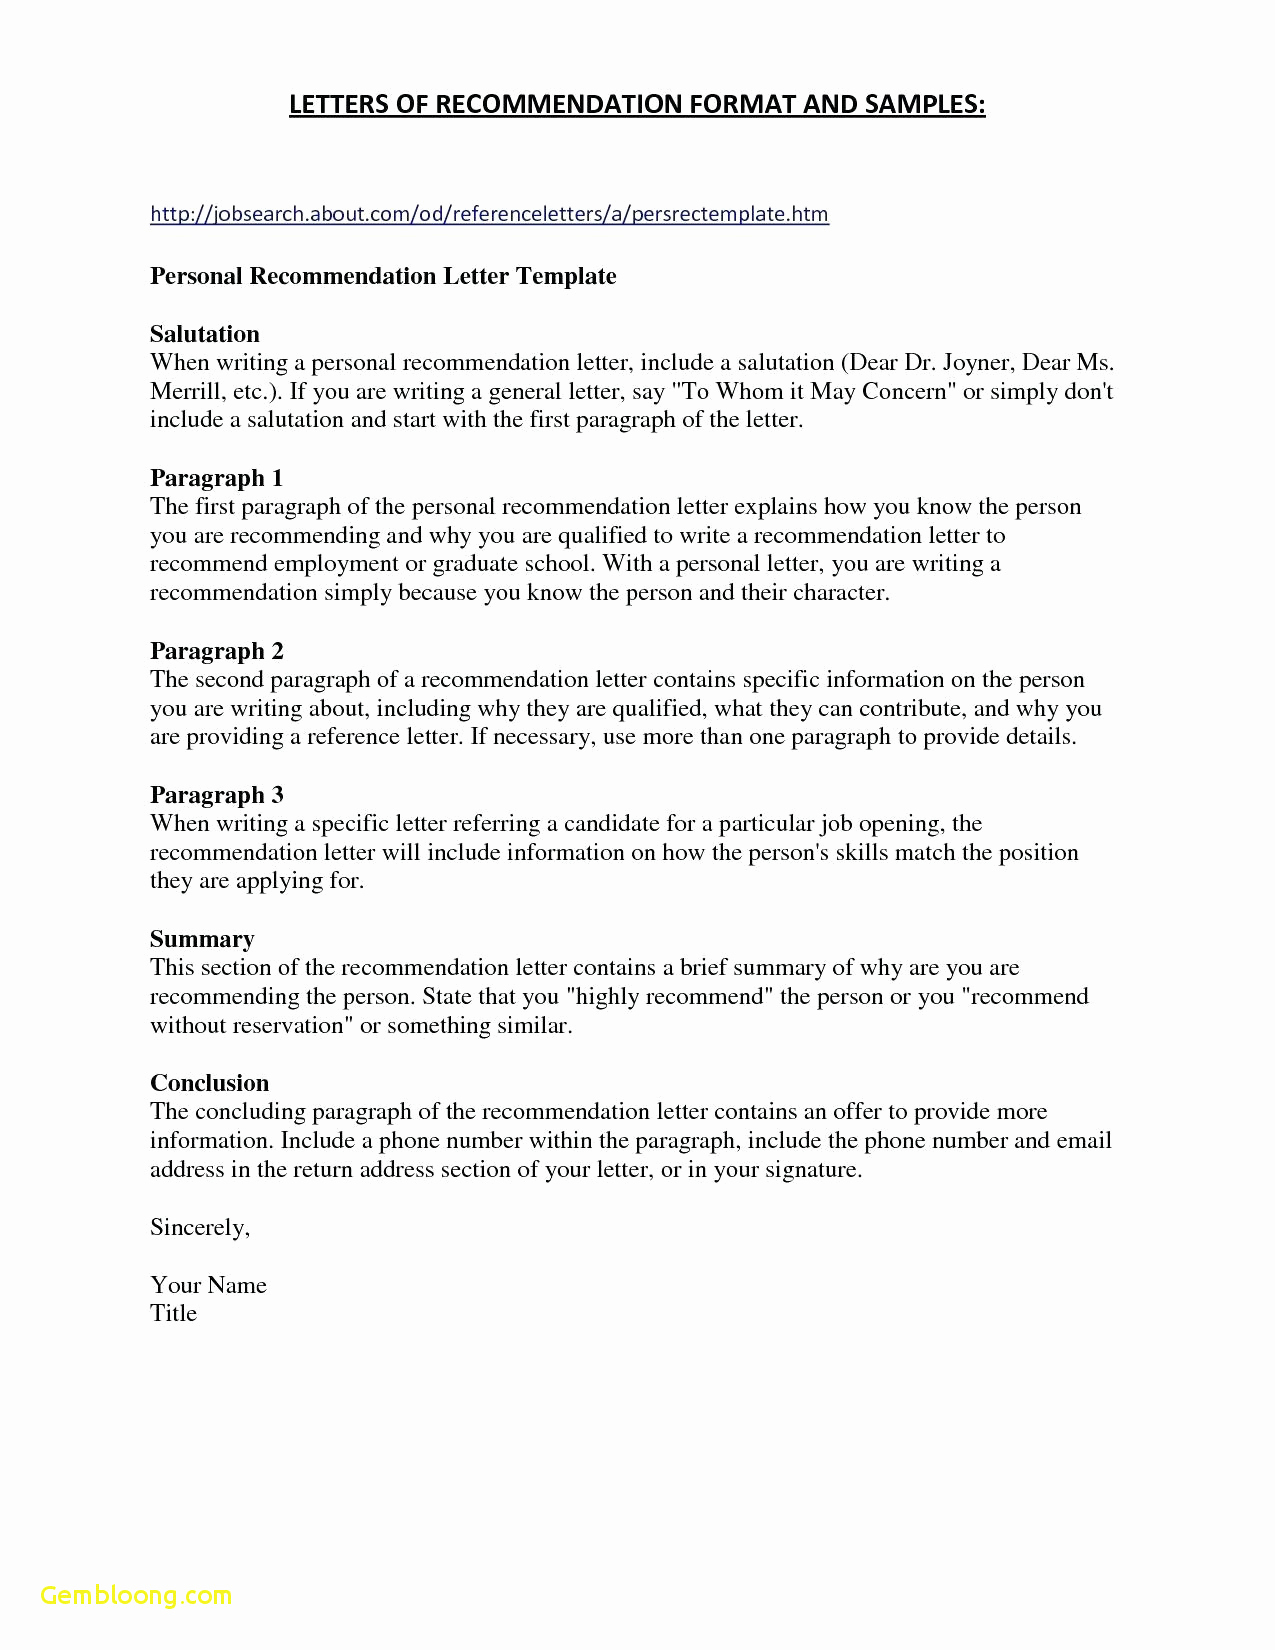 Personal Letter Template - Personal Re Mendation Letter for Employment Lovely References for